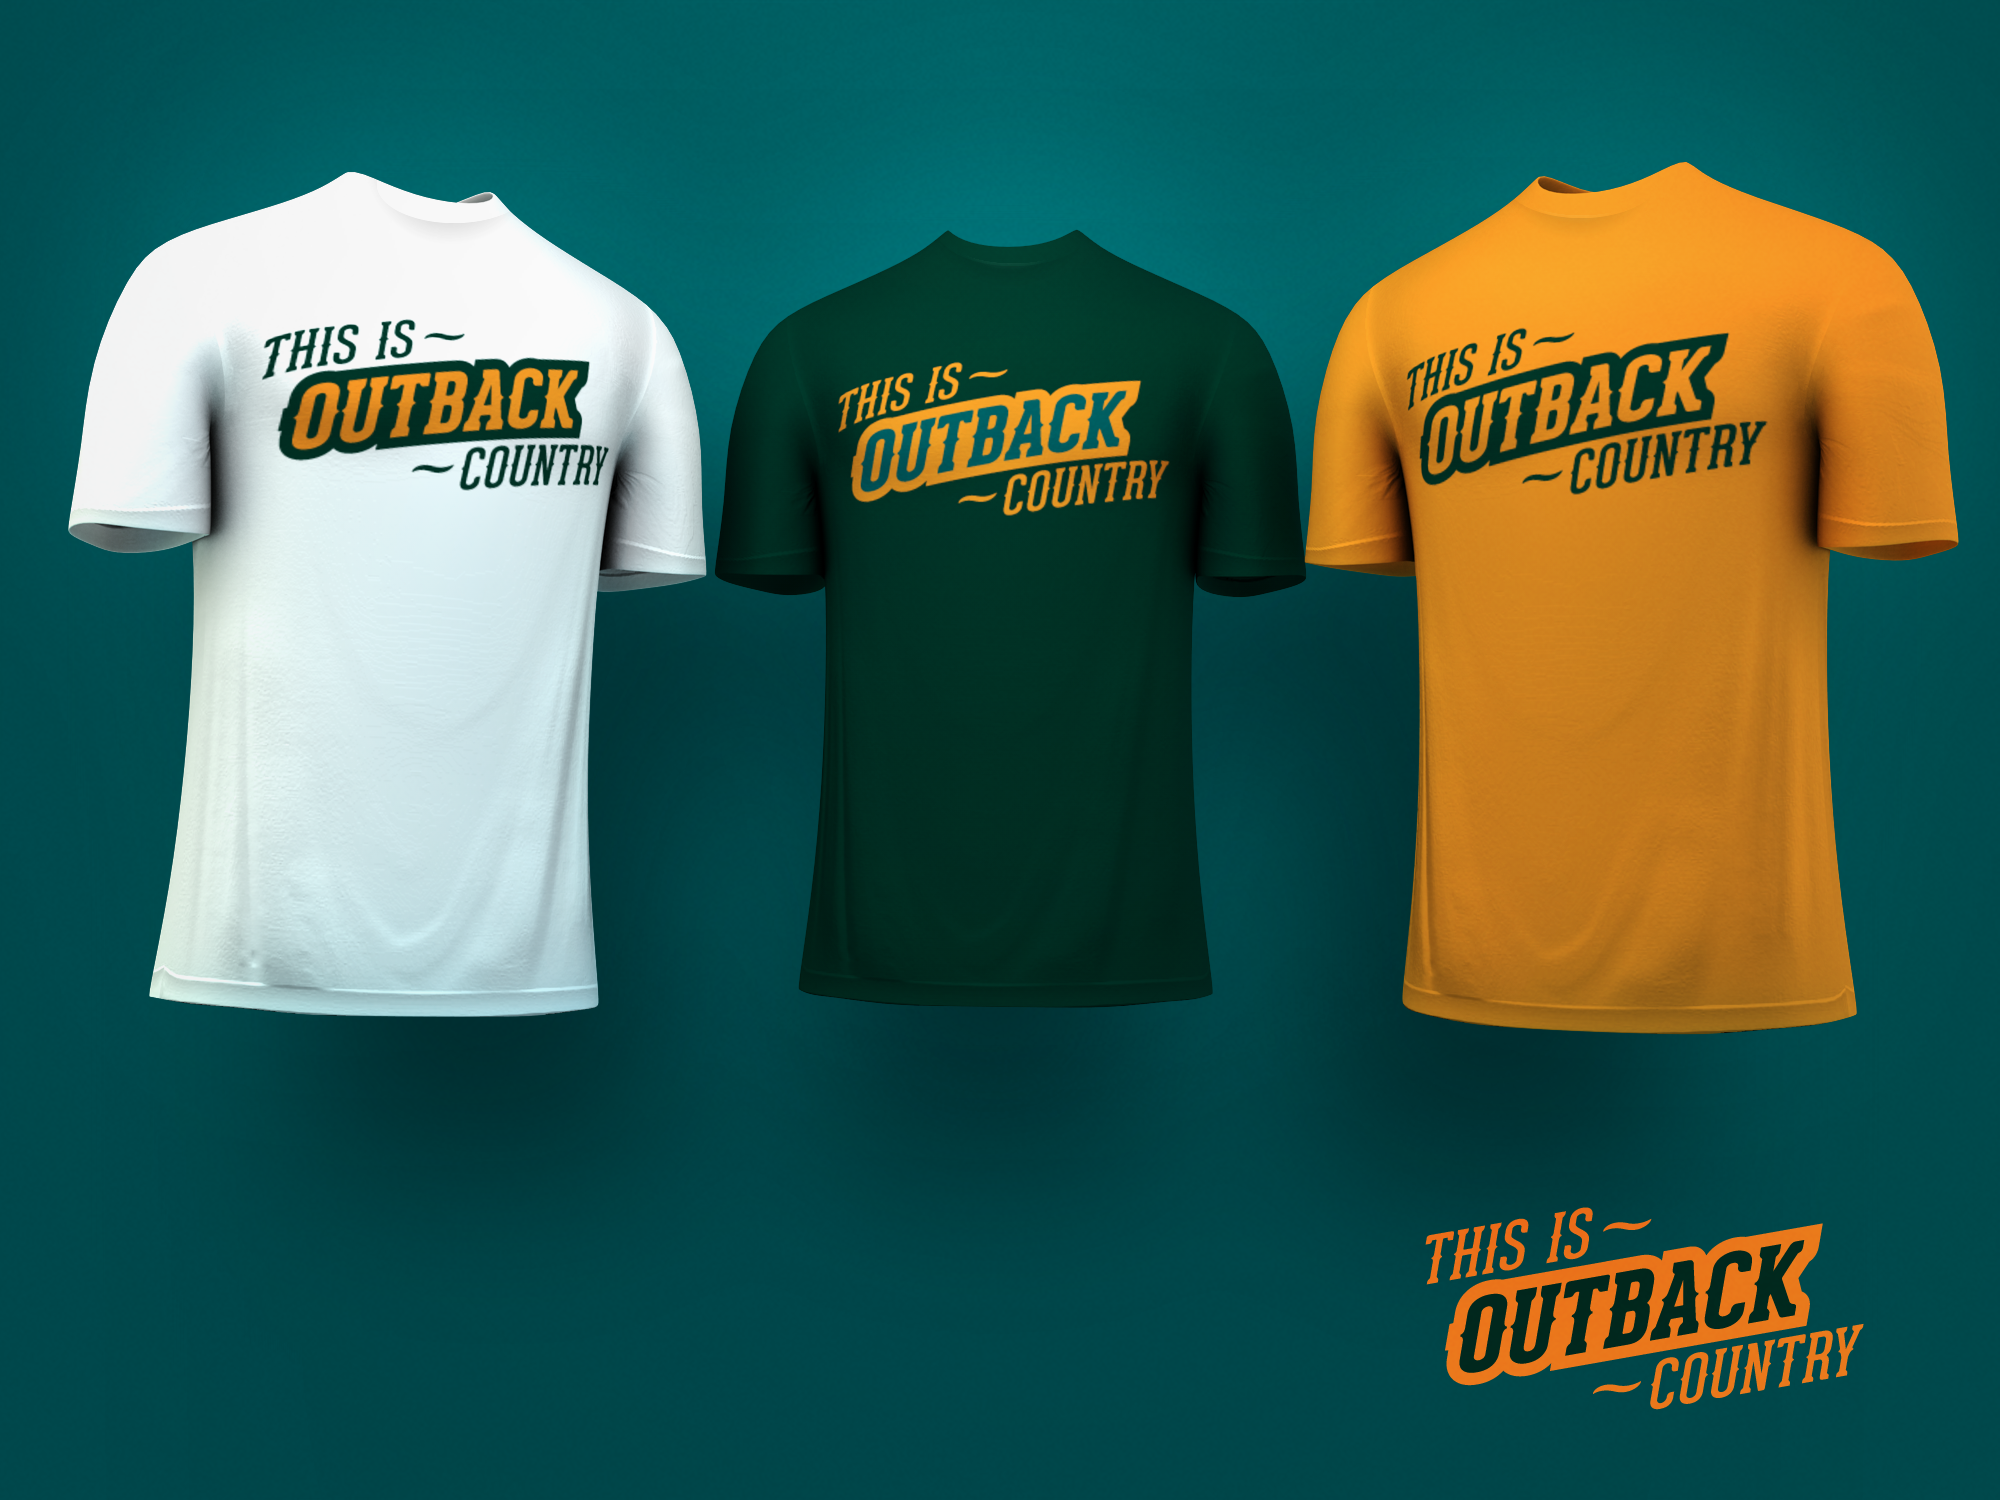 Outback T Shirts by Fraser Davidson on Dribbble